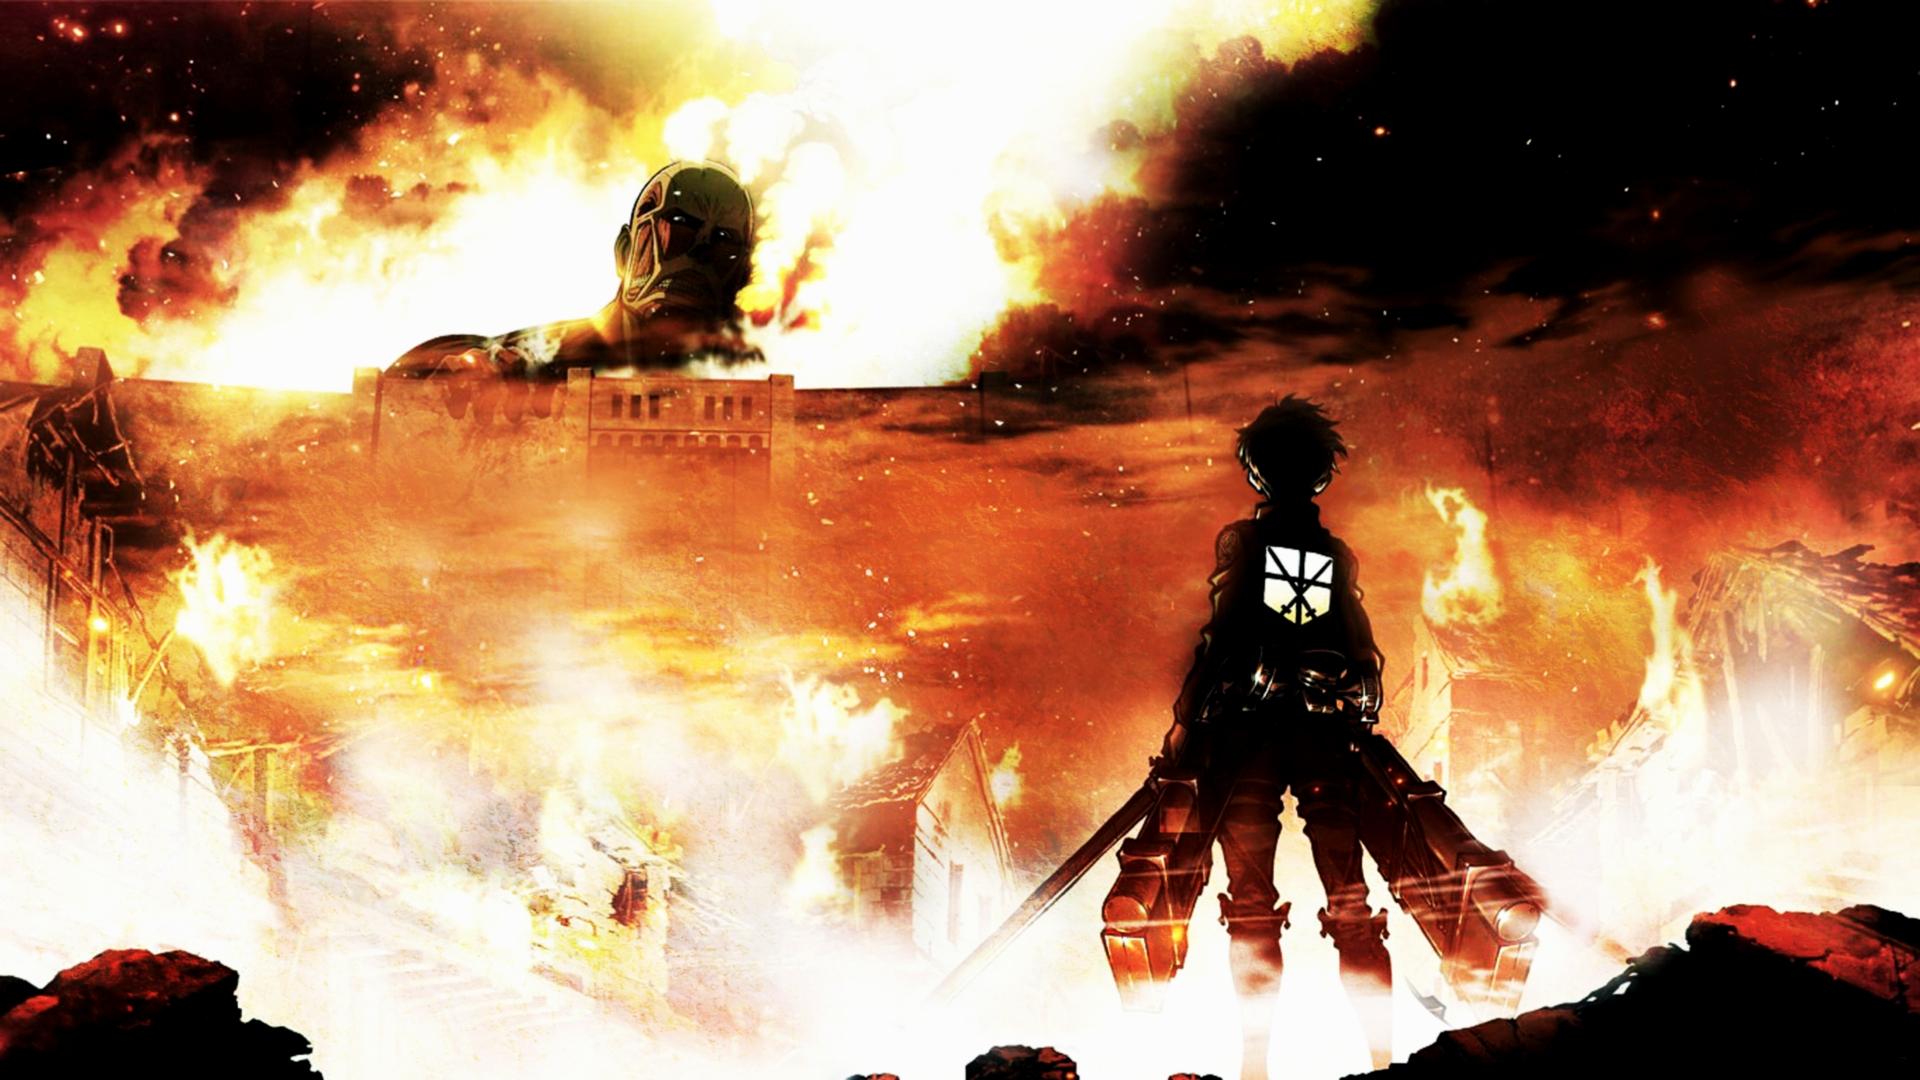 Attack On Titan Live Wallpaper Android On Titan Wallpaper & Background Download